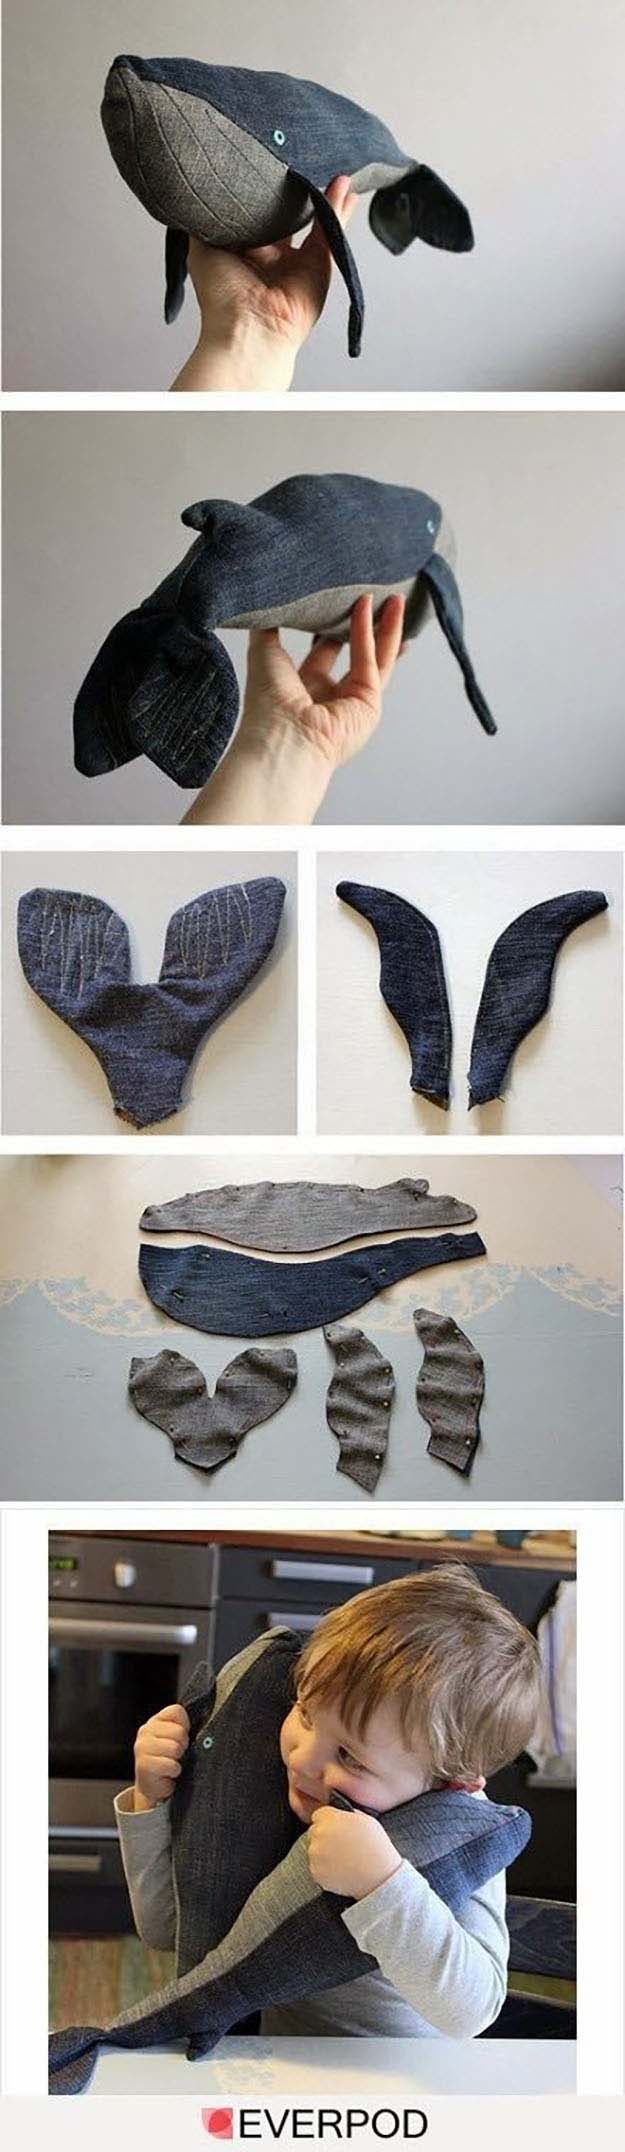 16-Upcycled-Projects-From-Old-Jeans-15